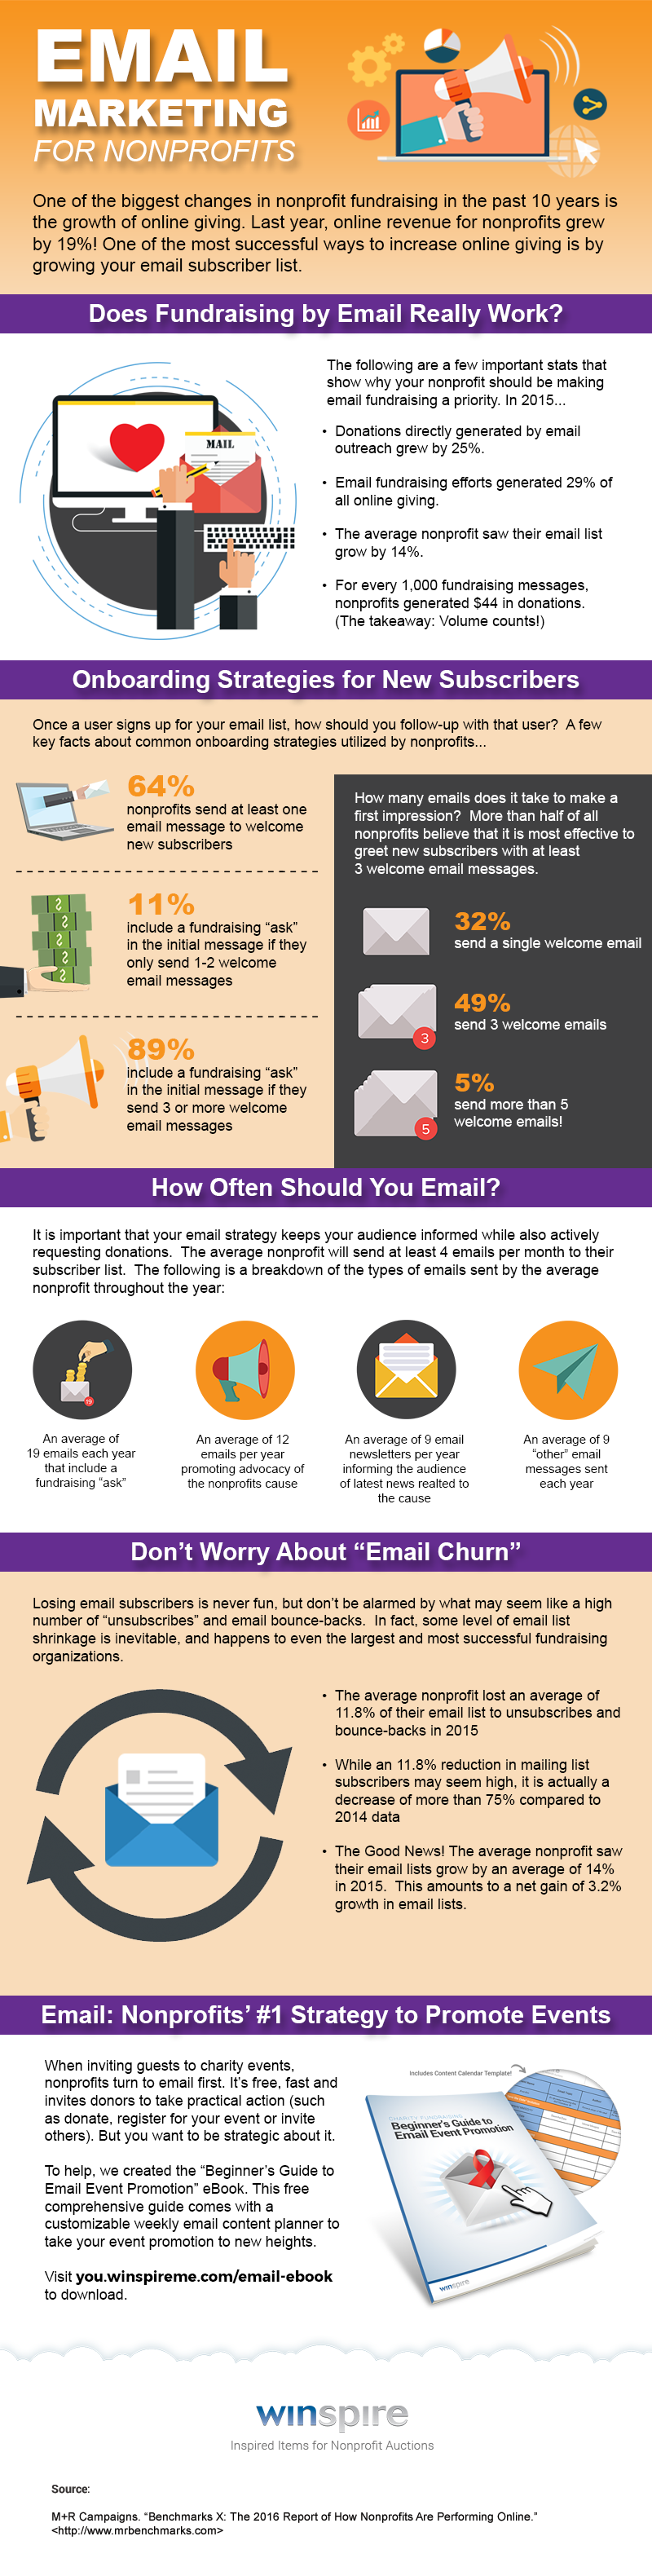 Nonprofit Email Marketing - What's Working in 2017 (infographic) 